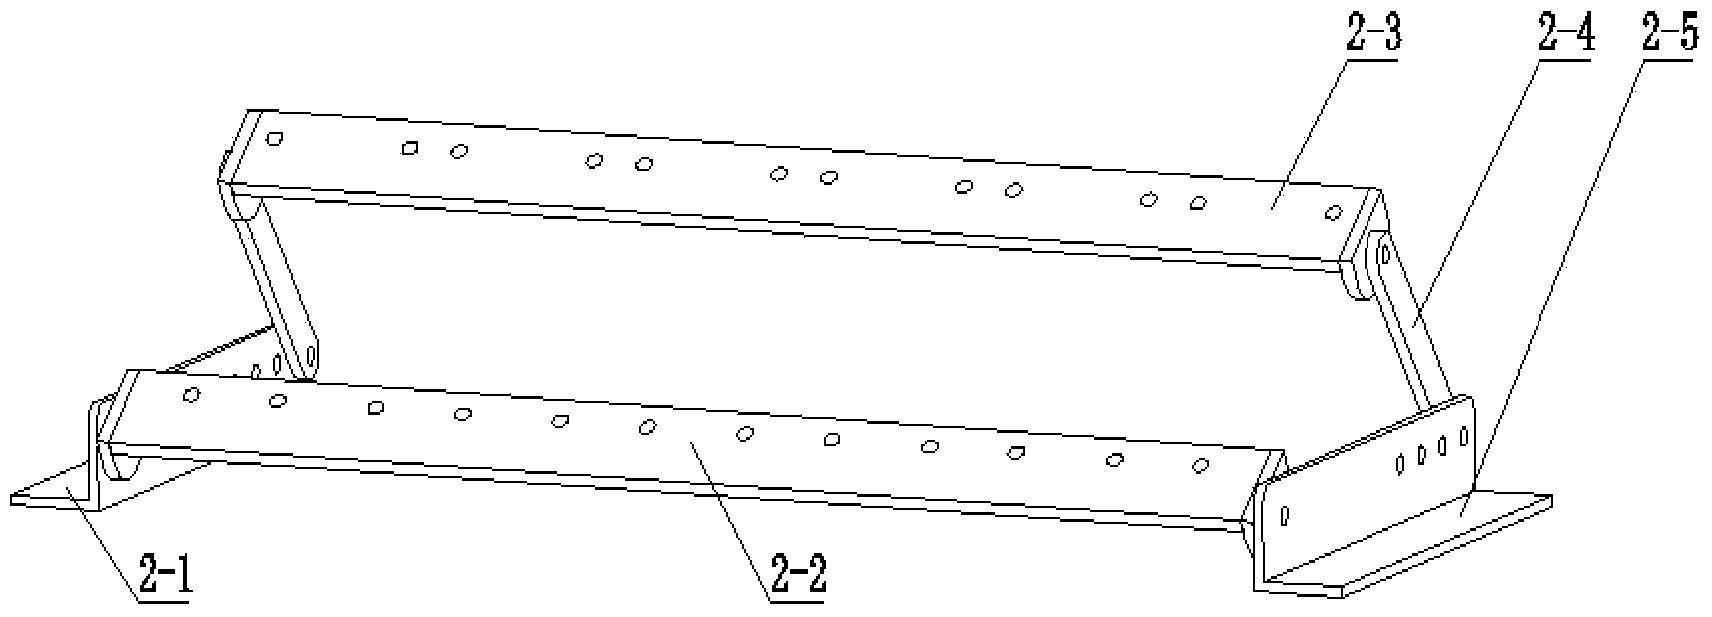 Linear driving type automatic throwing device for multiple jettison type probes